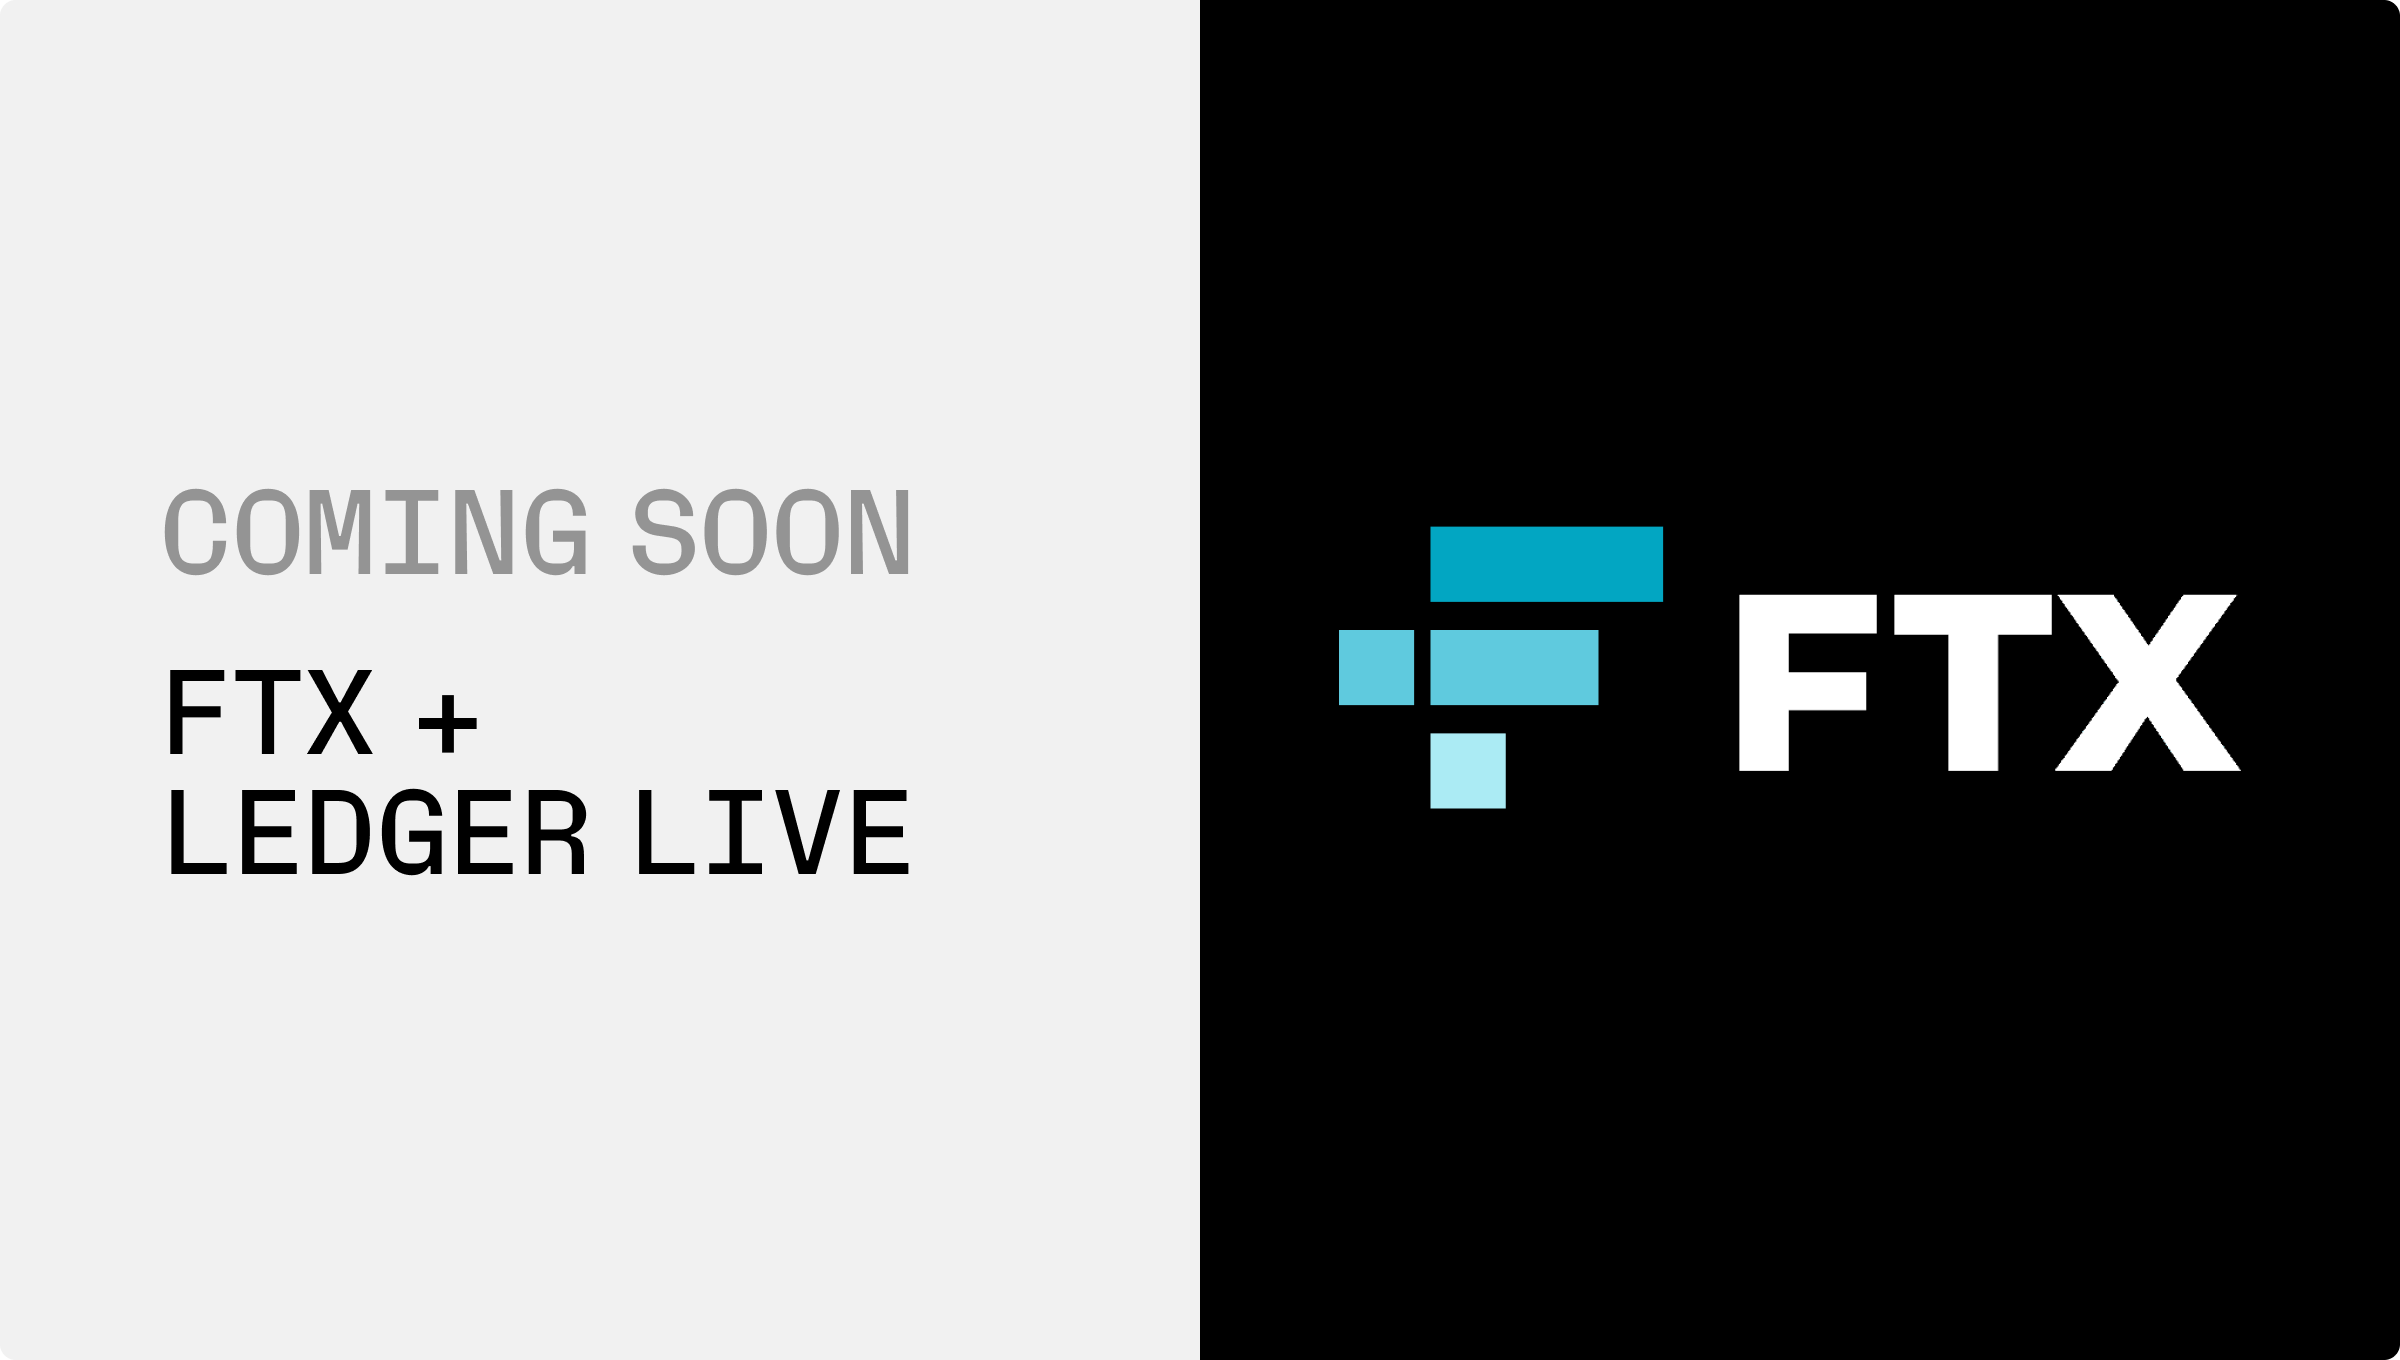 Ledger and FTX join forces to enable leverage and trading through Ledger Live